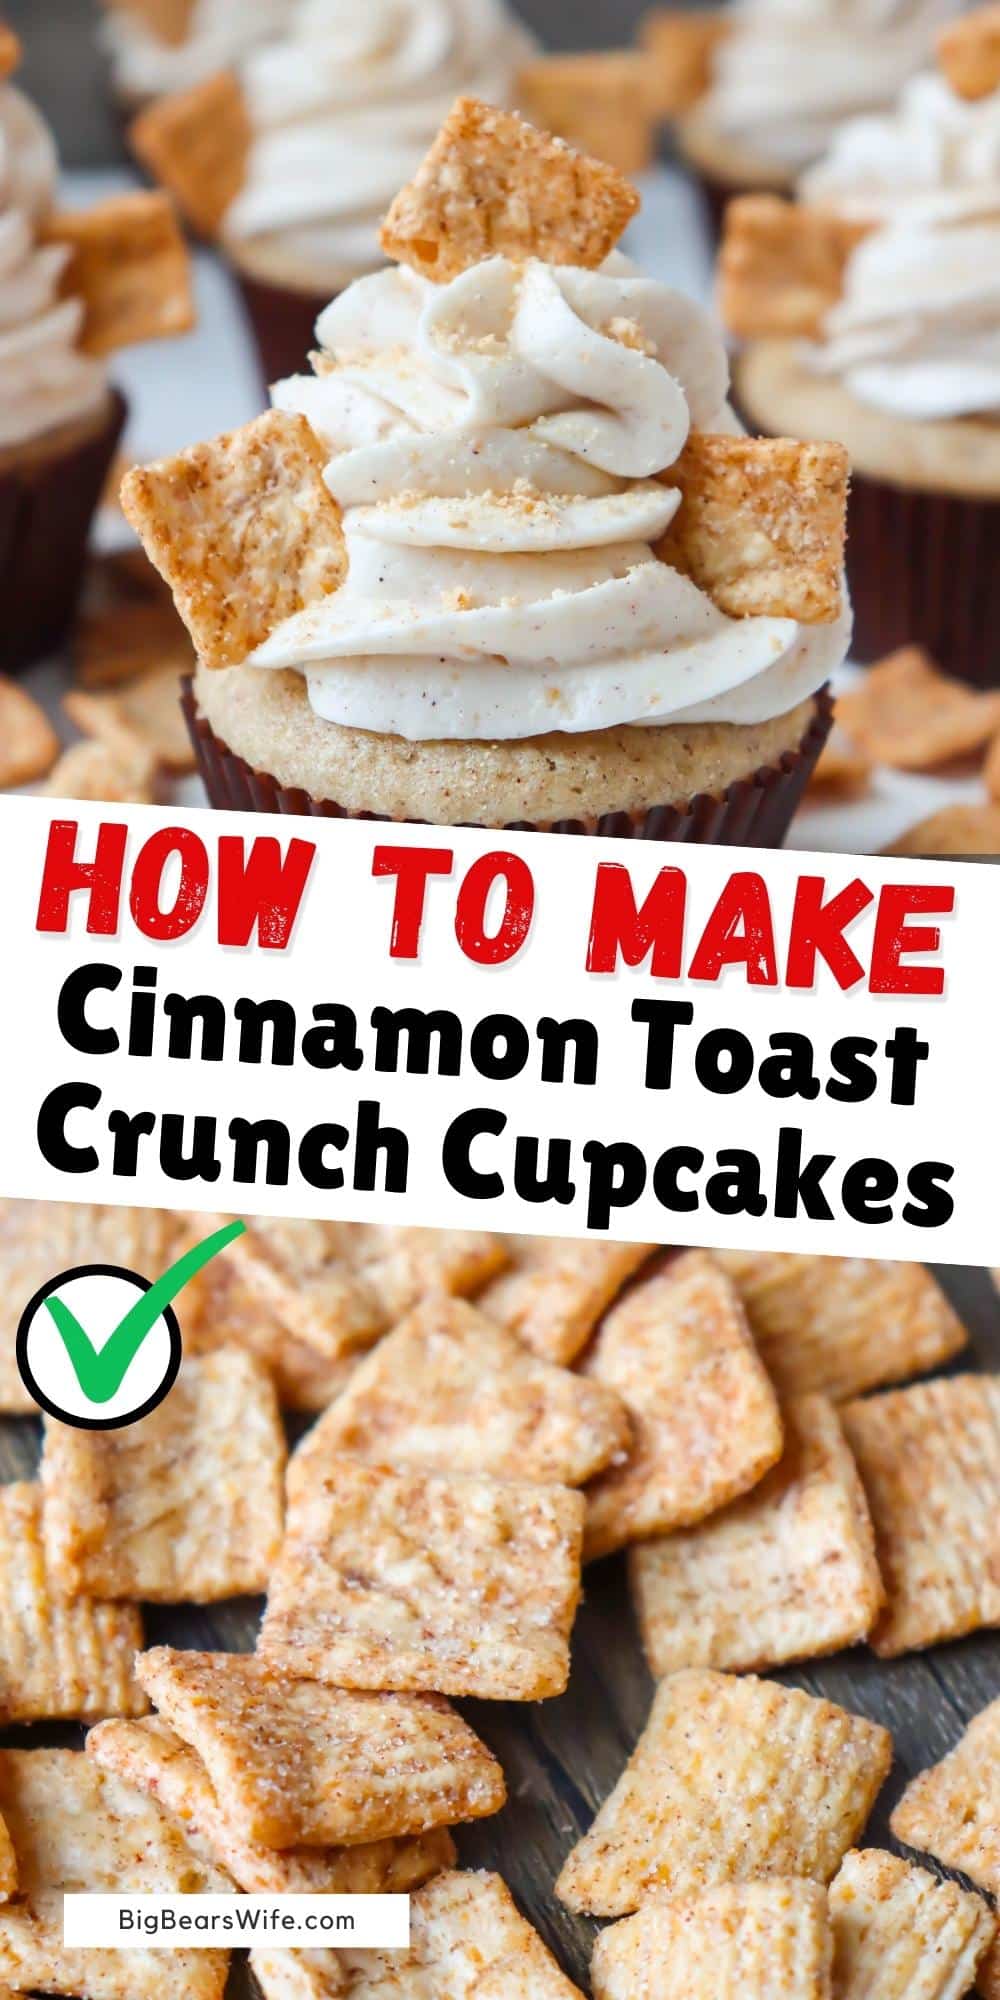 These fun and easy Cinnamon Toast Crunch Cupcakes taste just like your favorite cereal. For ease, we start with a box cake mix that is upgraded with vanilla, cinnamon, and sour cream. Then these breakfast-themed cupcakes are topped with a cream cheese Cinnamon Toast Crunch frosting.  via @bigbearswife